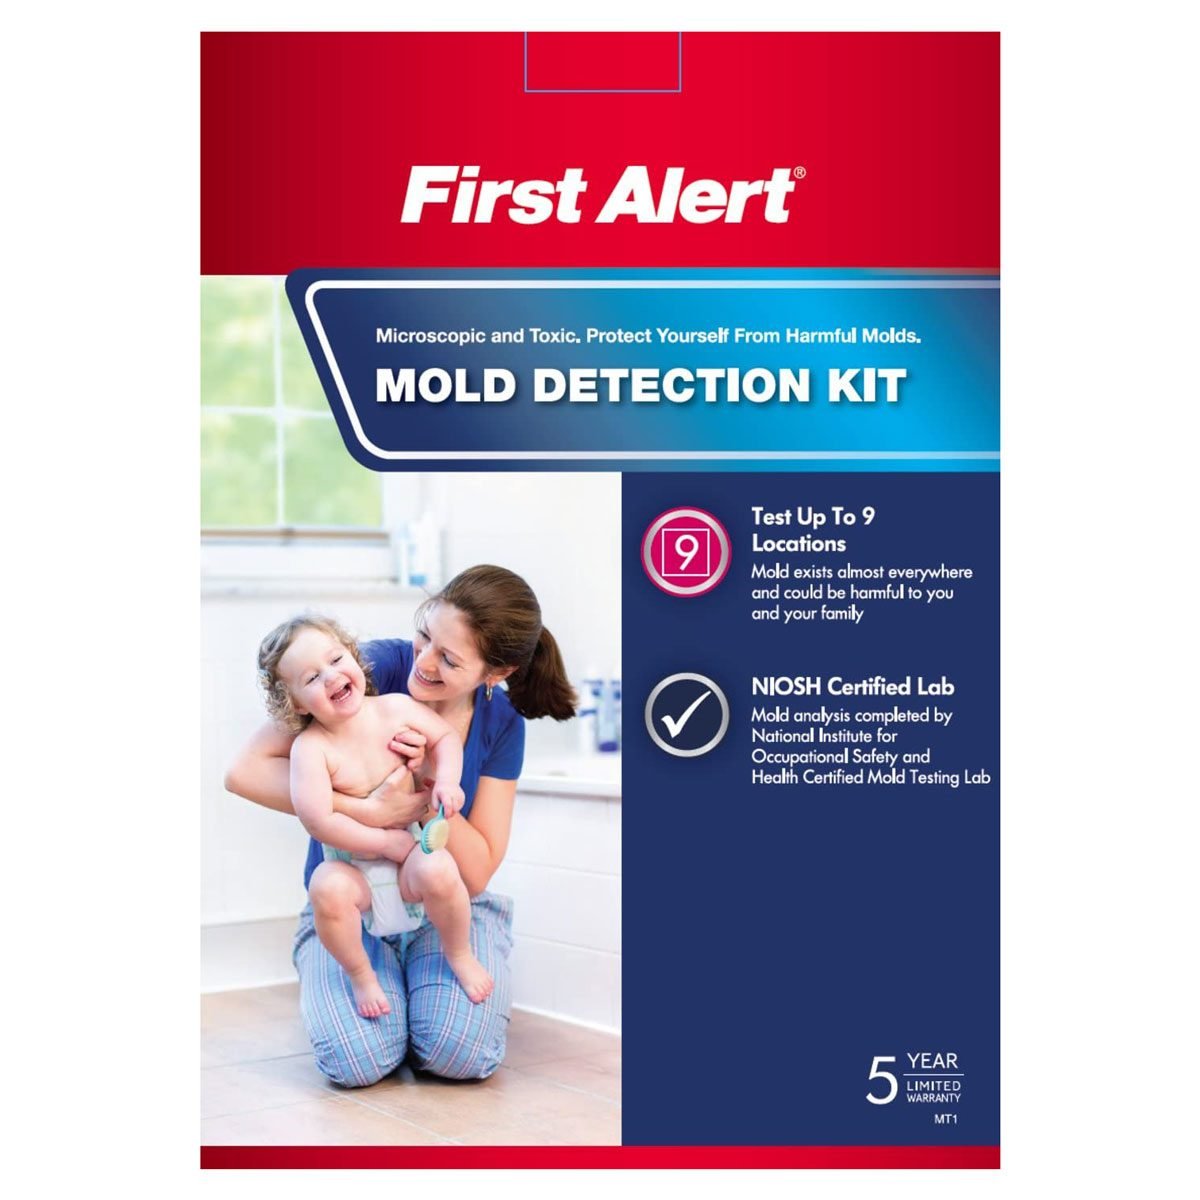 Home Mold Test Kits-Do They Work?